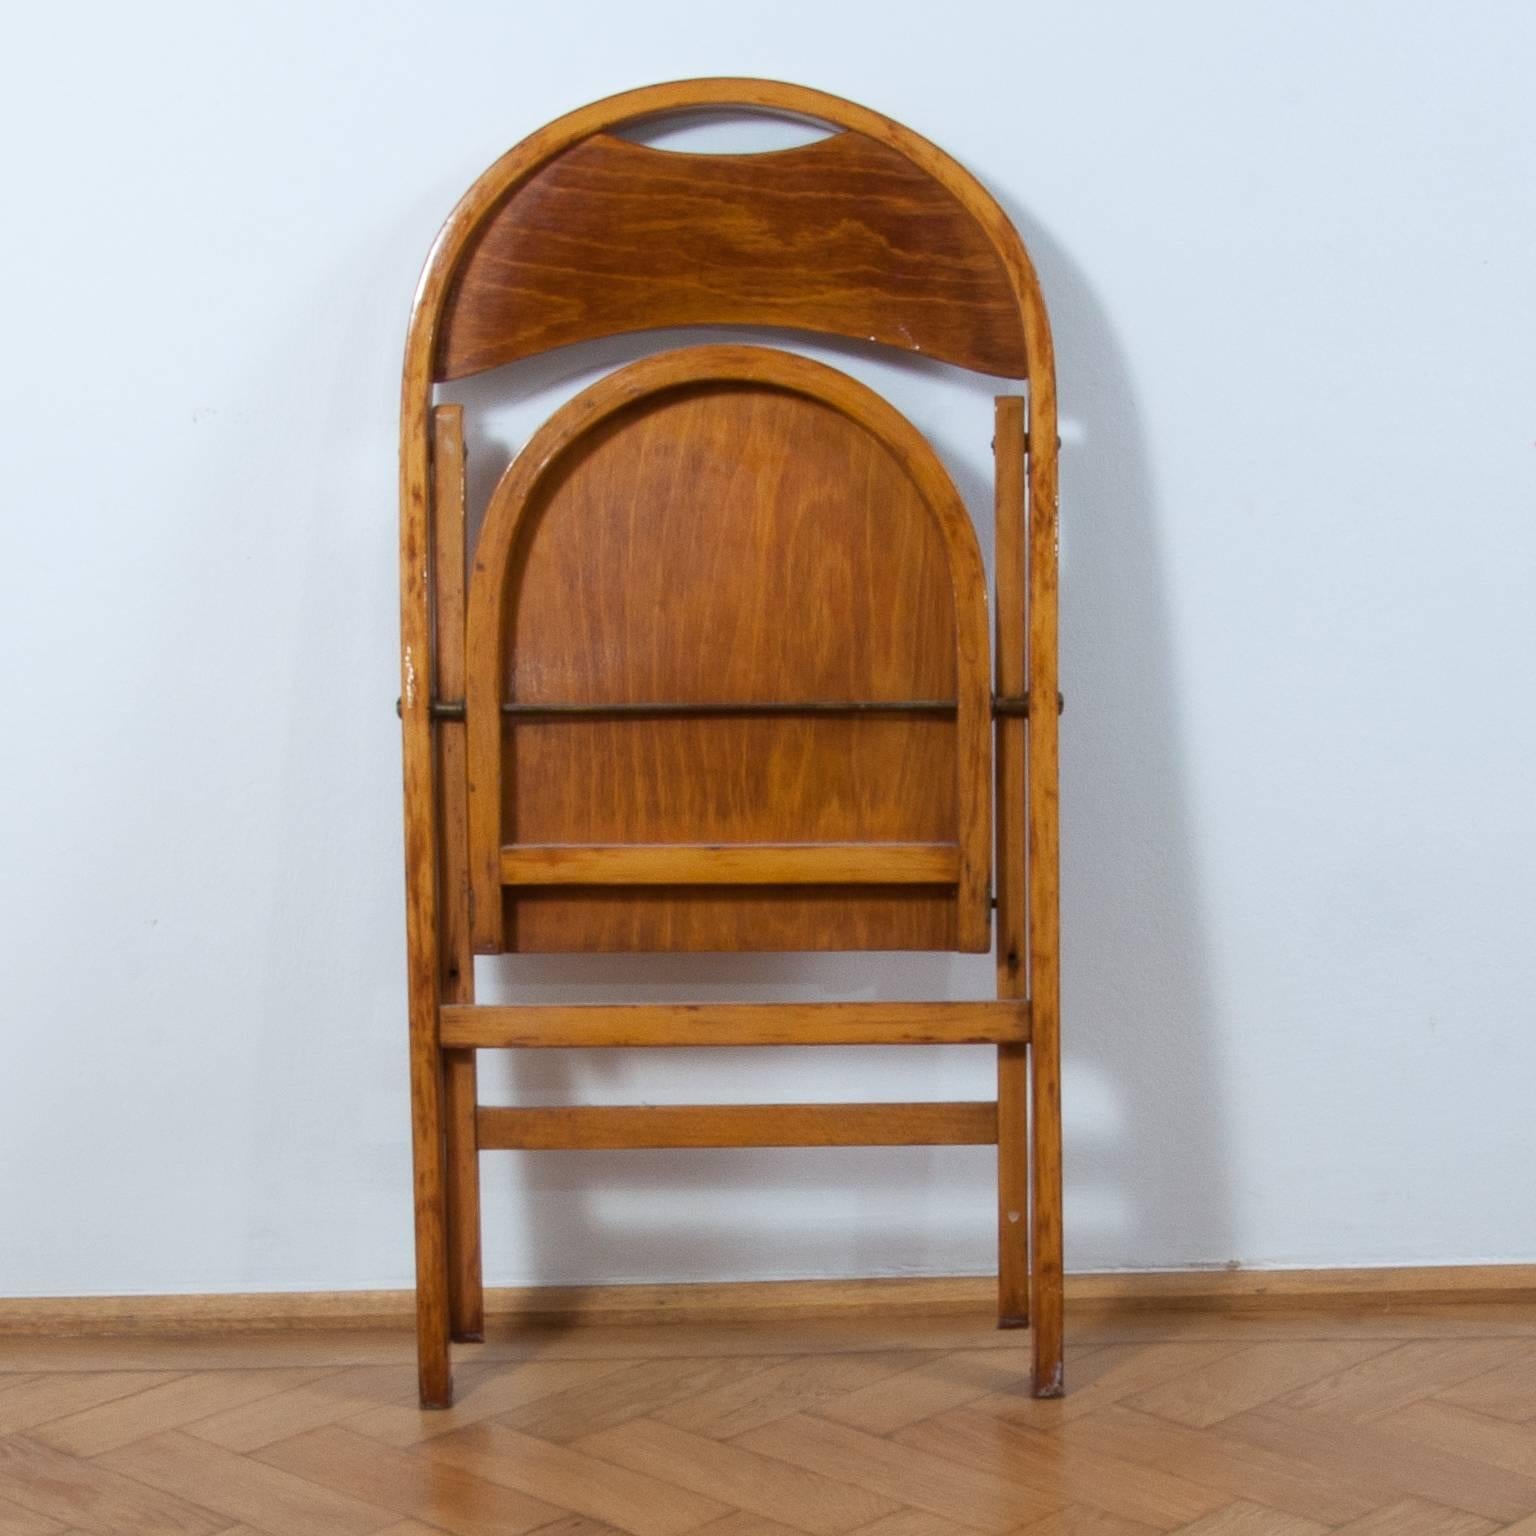 Stained Thonet 751 Folding Chair Very Functional and Collectable, Classic Jugendstil For Sale